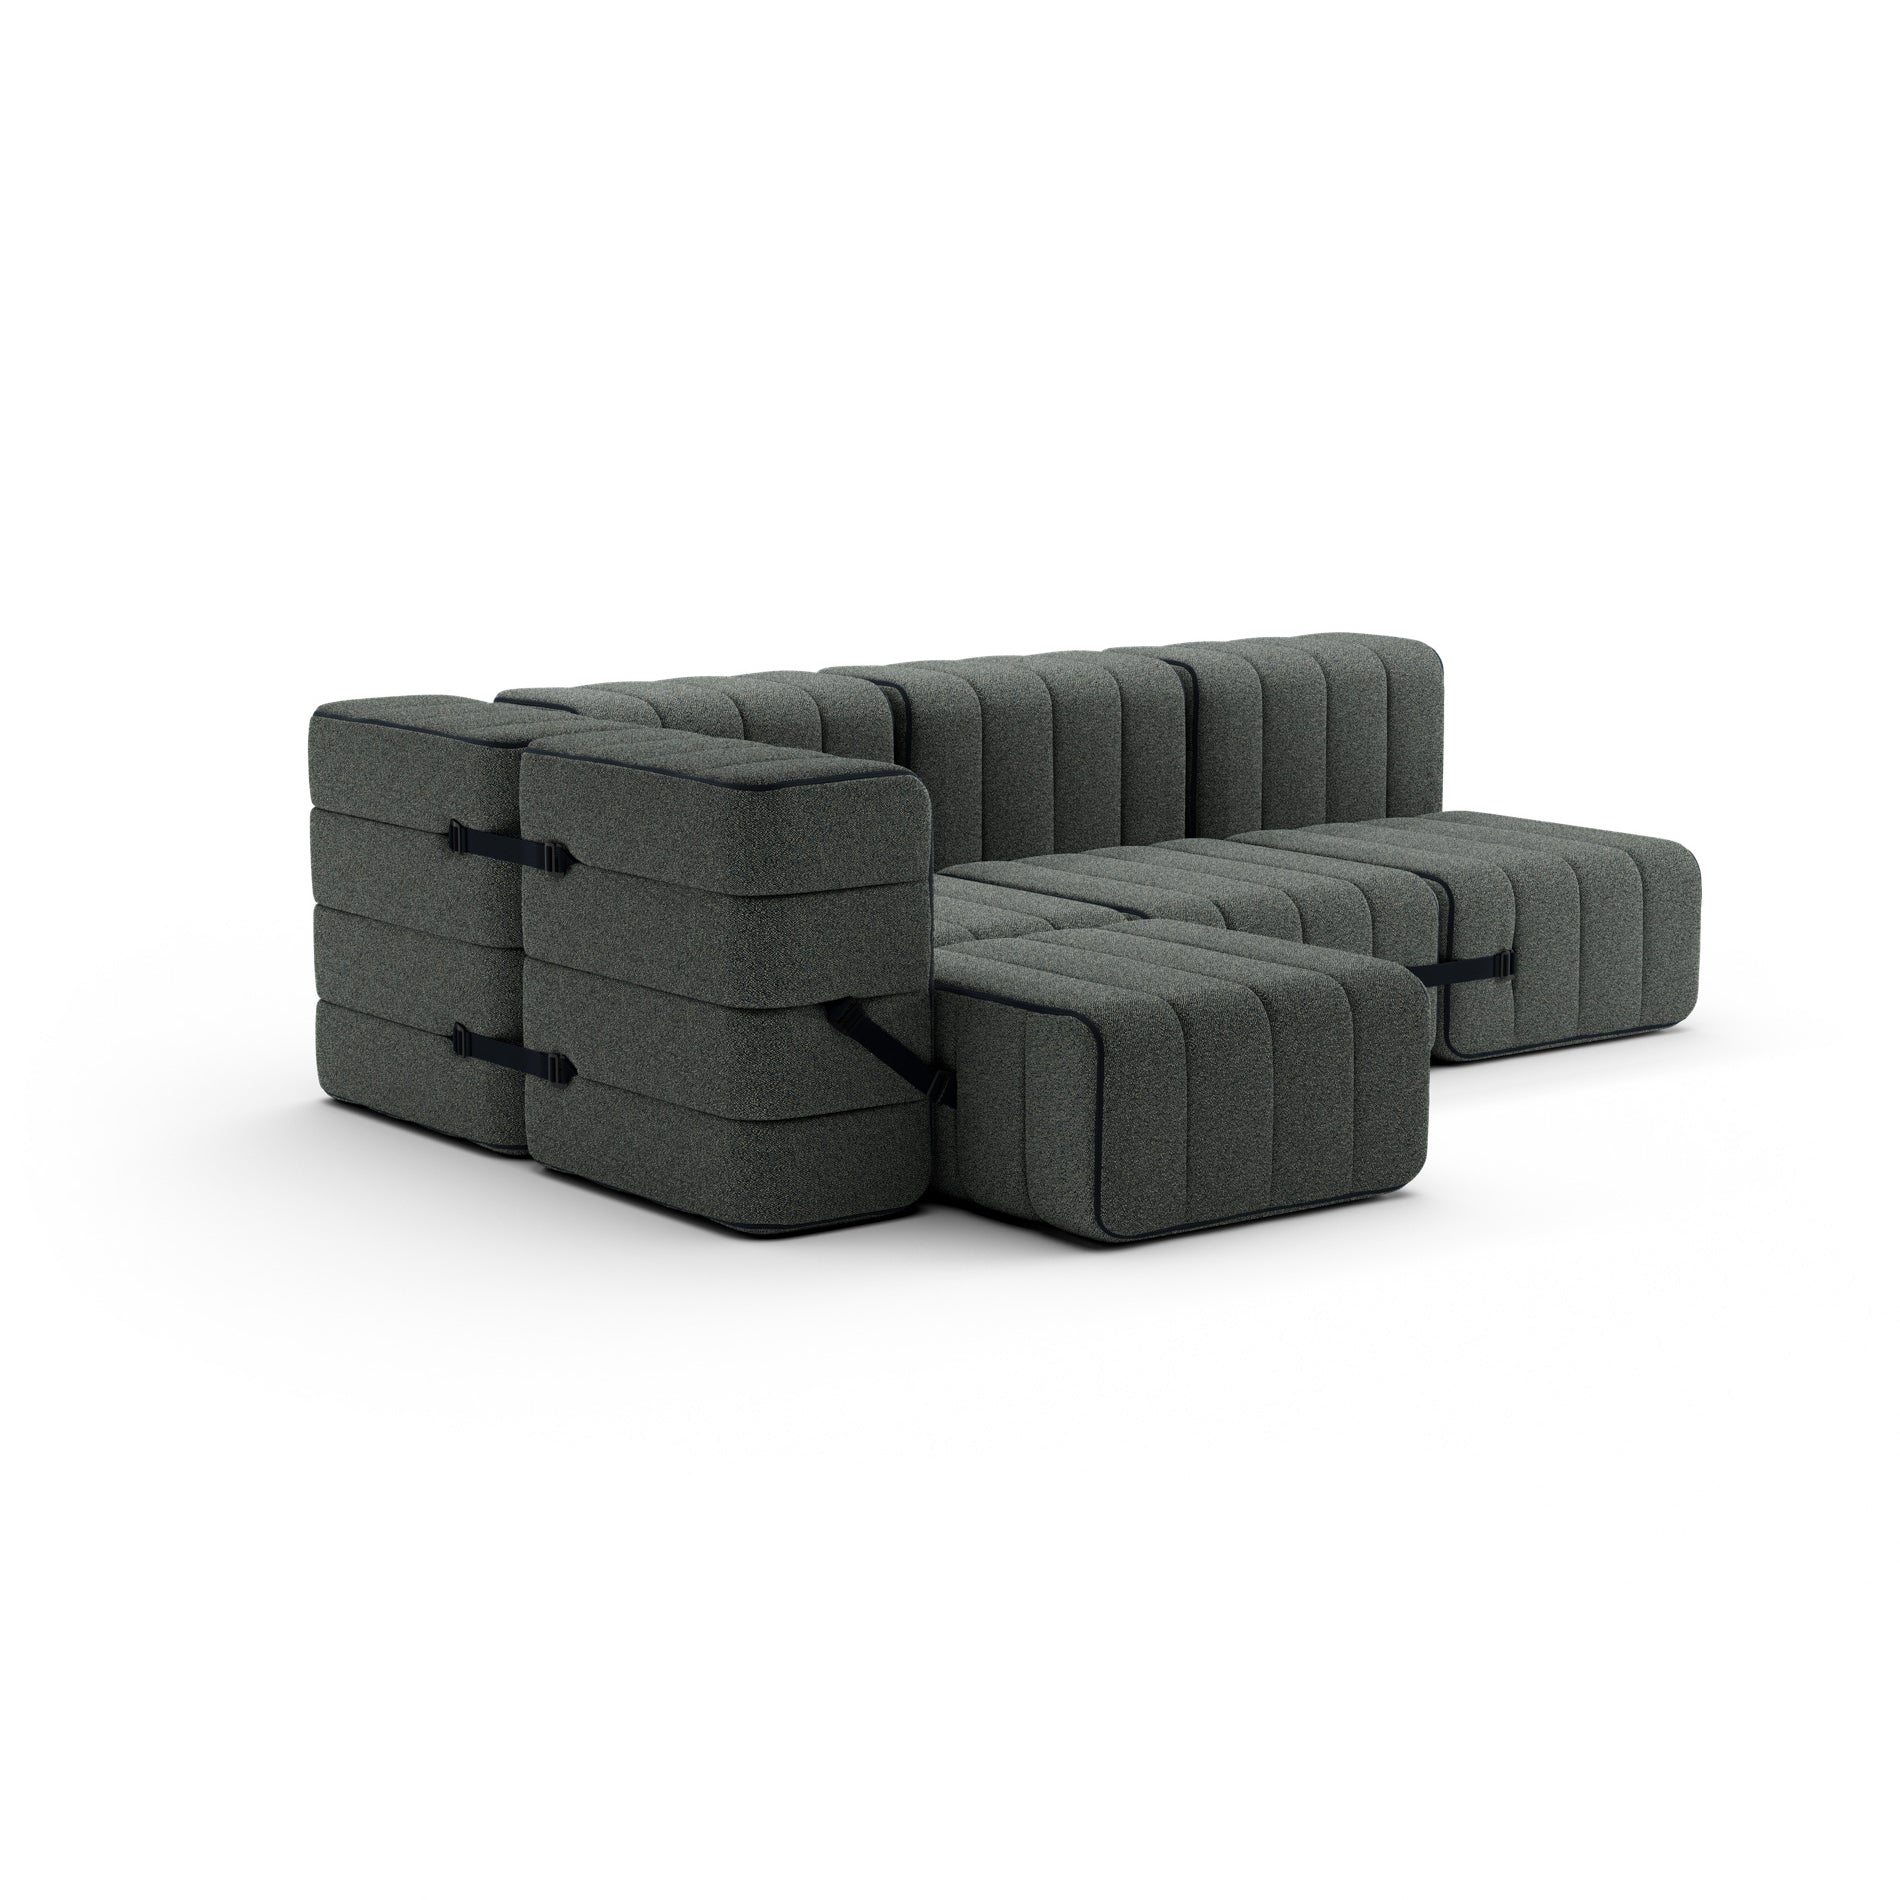 Curt Sofa System - Gravel - THAT COOL LIVING